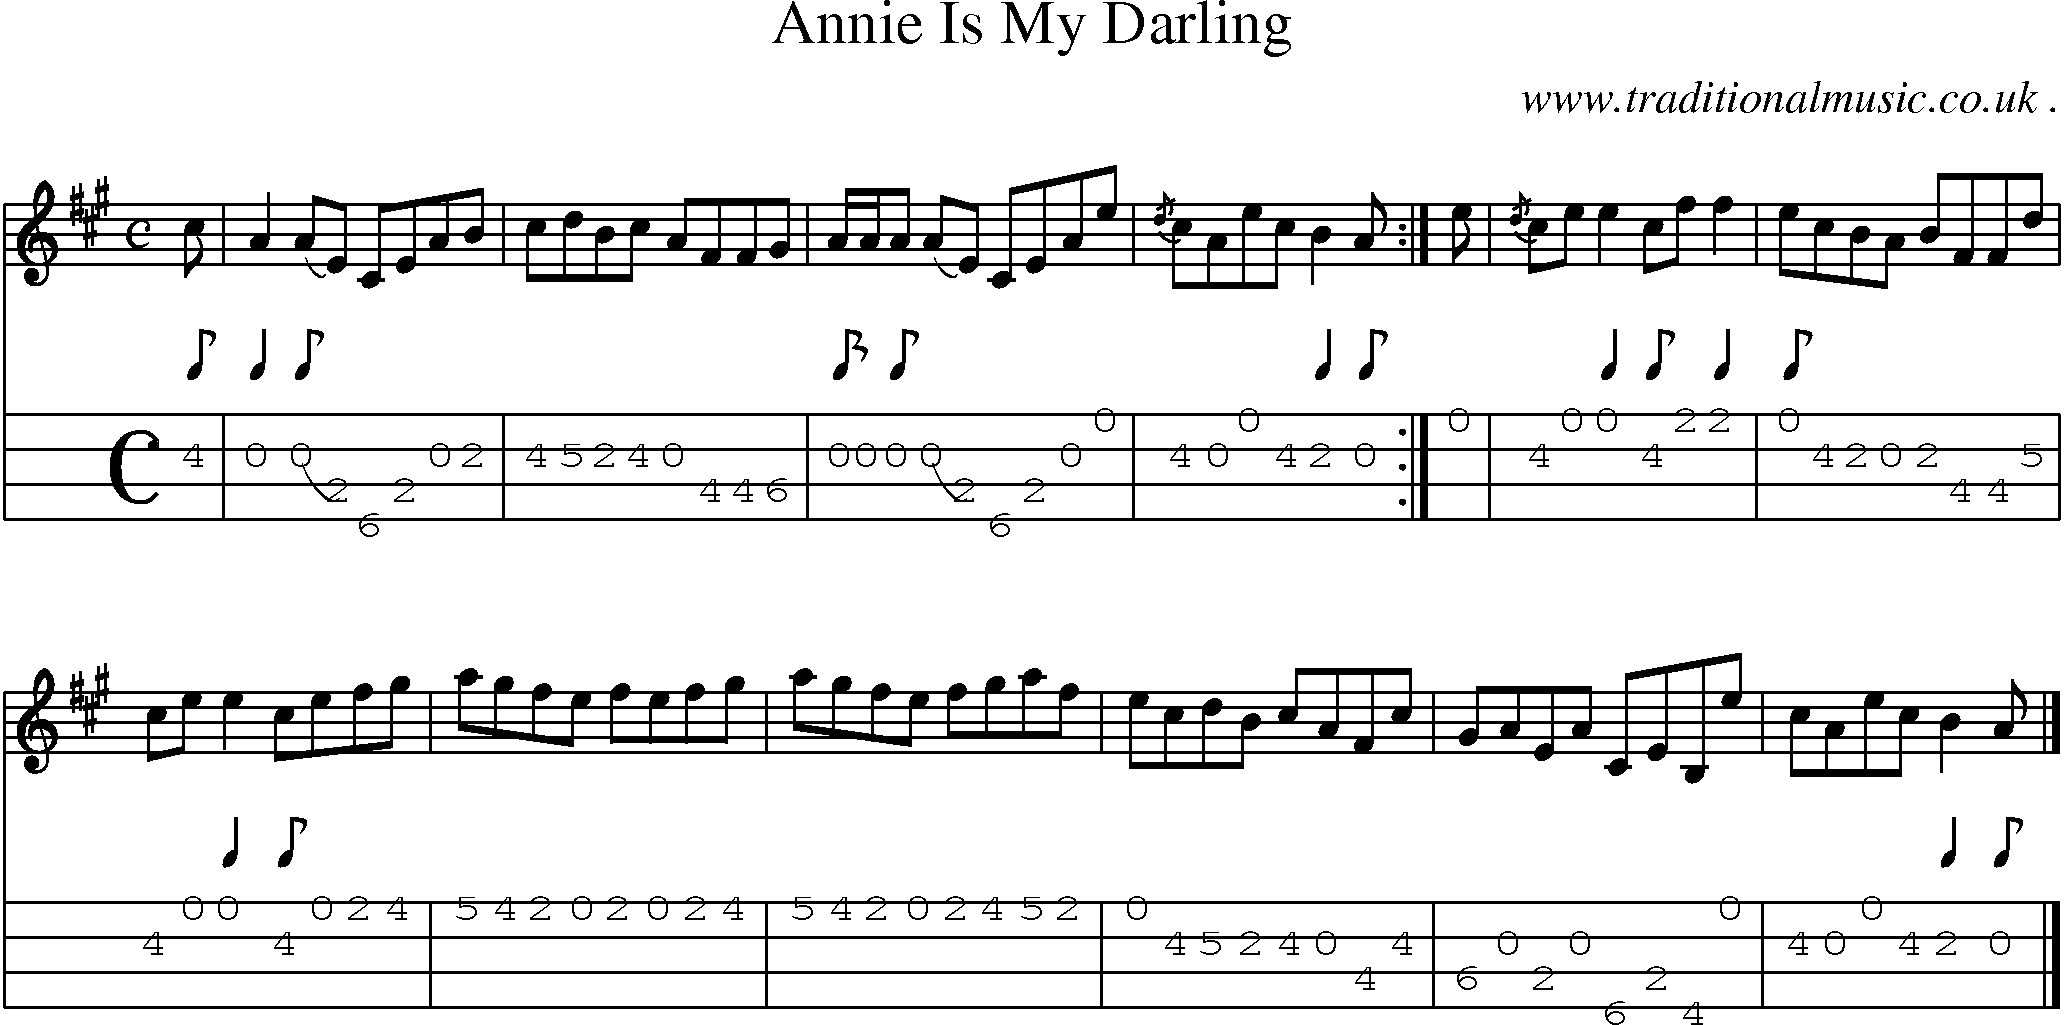 Sheet-music  score, Chords and Mandolin Tabs for Annie Is My Darling